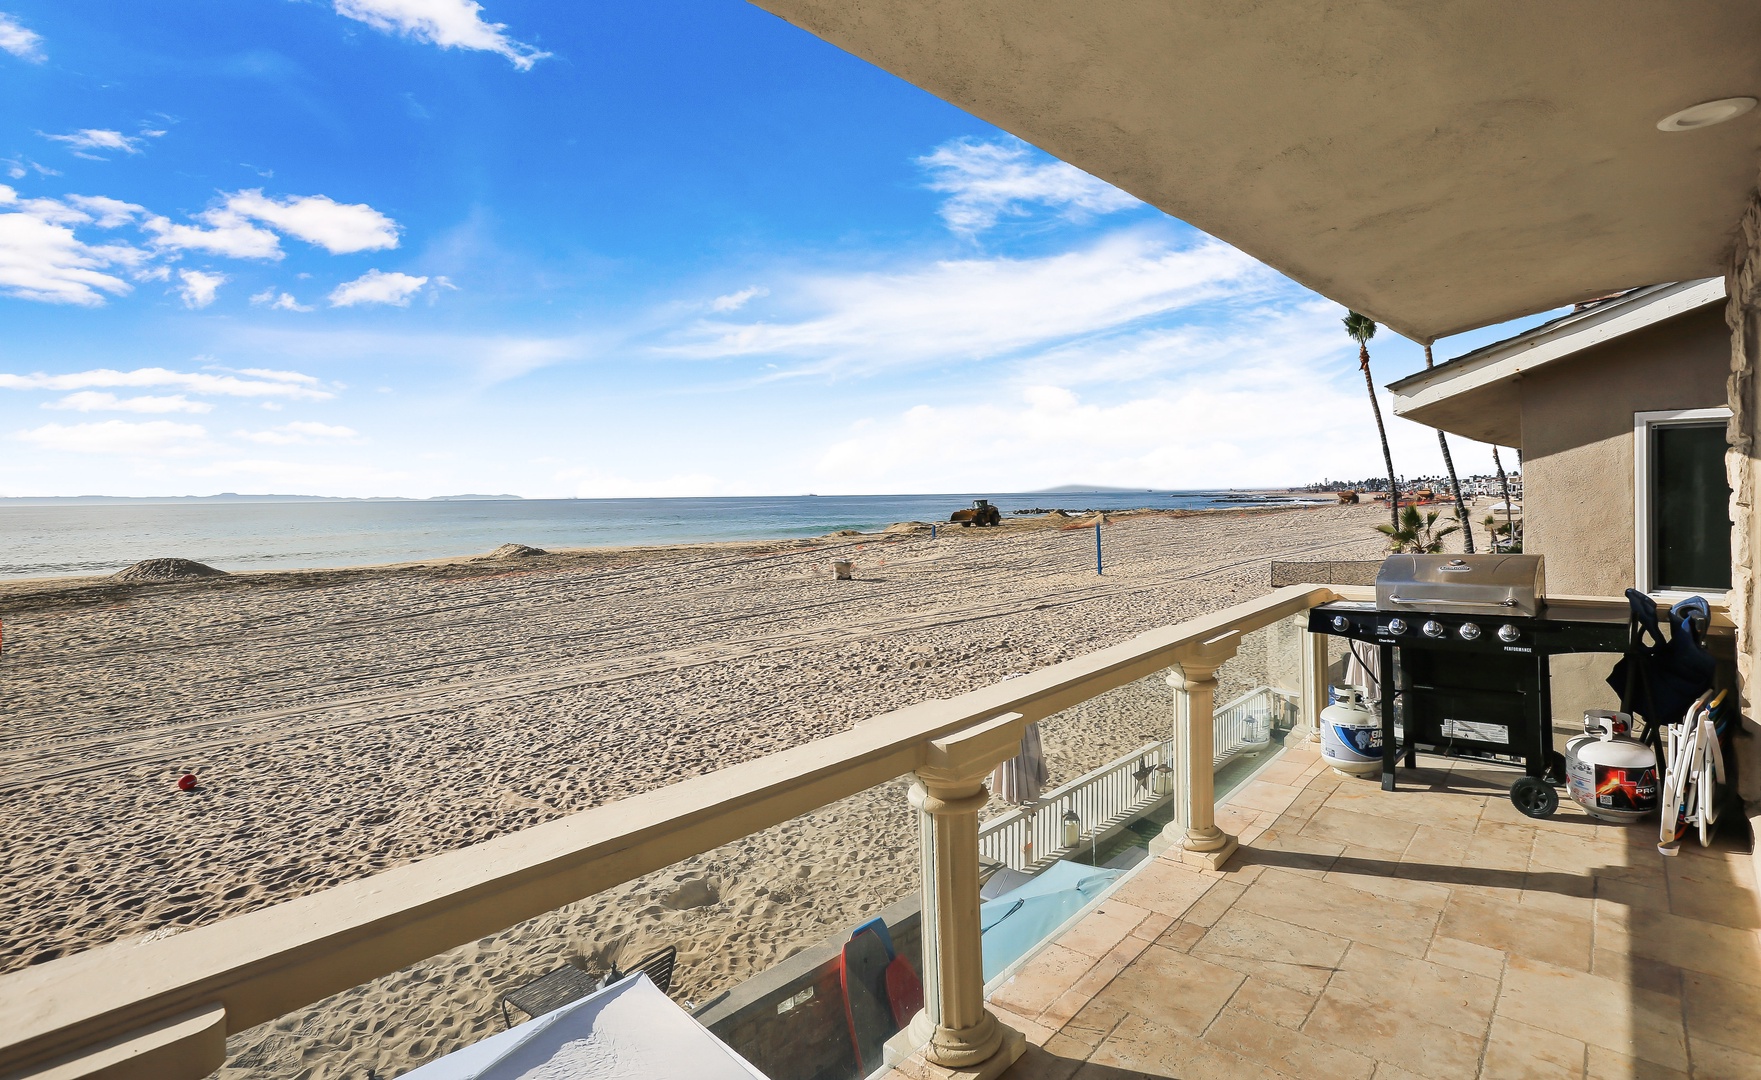 Beachfront balcony with seating and BBQ